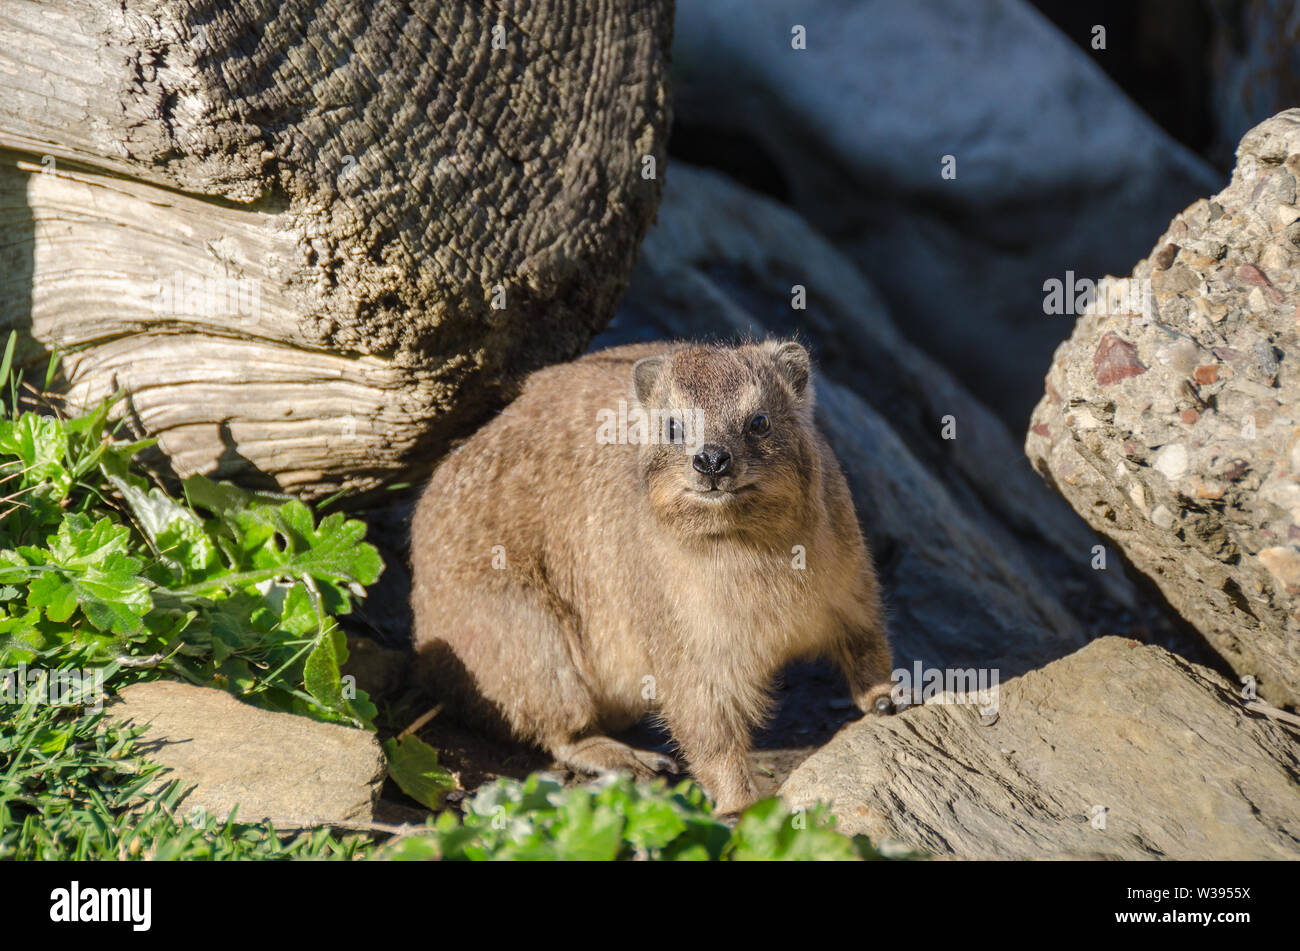 Cape hyrax (Procavia capensis) or dassie, having incomplete thermoregulation warms up on the rock in the Tsitsikamma National Park in South Africa Stock Photo